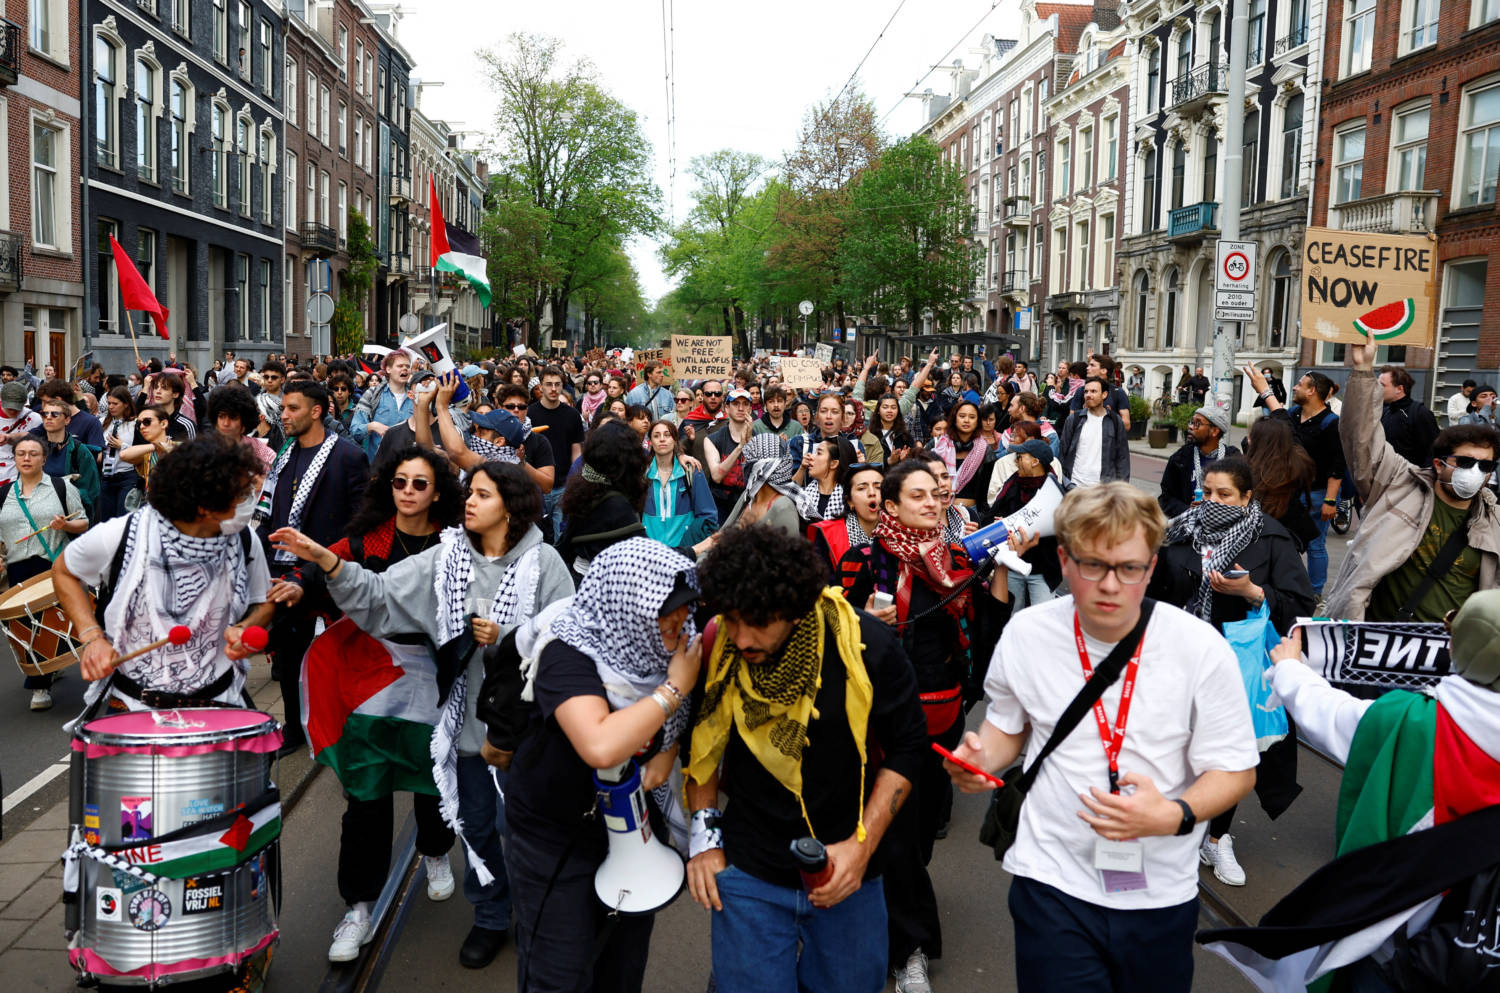 Students And Employees Of The University Of Amsterdam Protest Against The Ongoing Conflict Between Israel And The Palestinian Islamist Group Hamas In Gaza, In Amsterdam